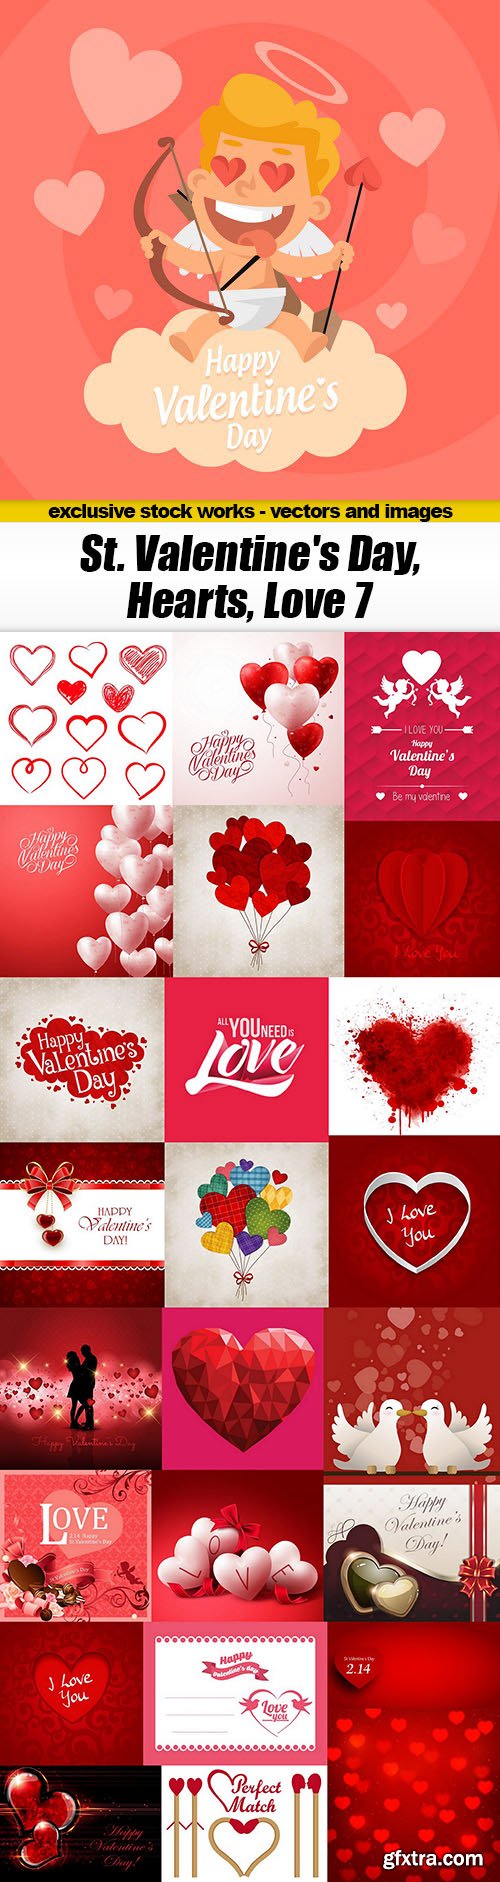 St. Valentine\'s Day, Hearts, Love #7, 25xEPS